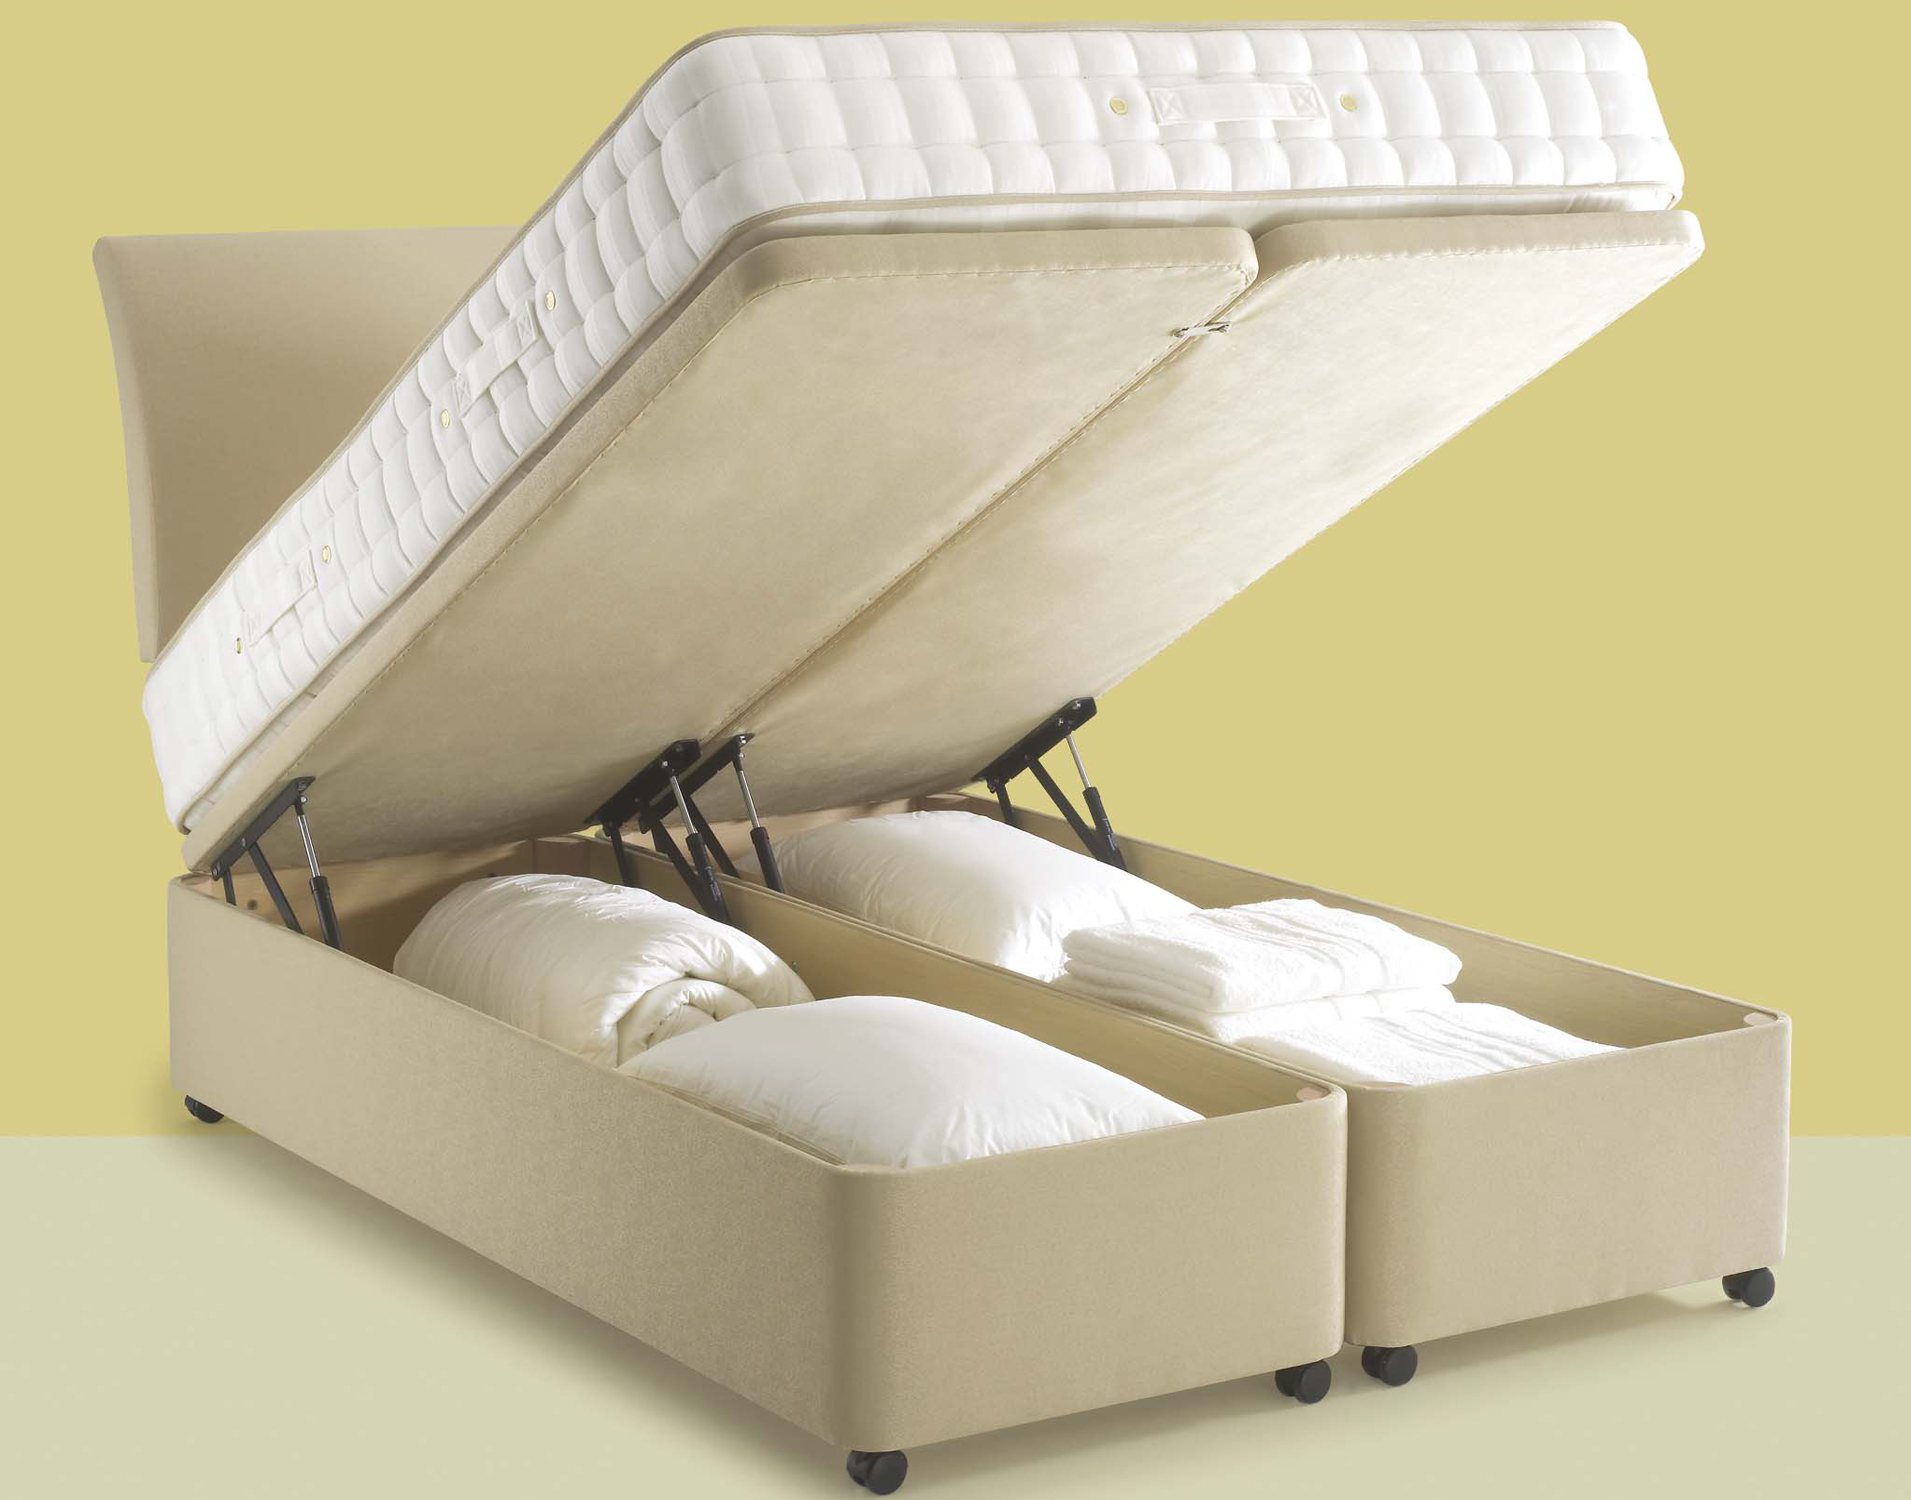 hypnos bed cost